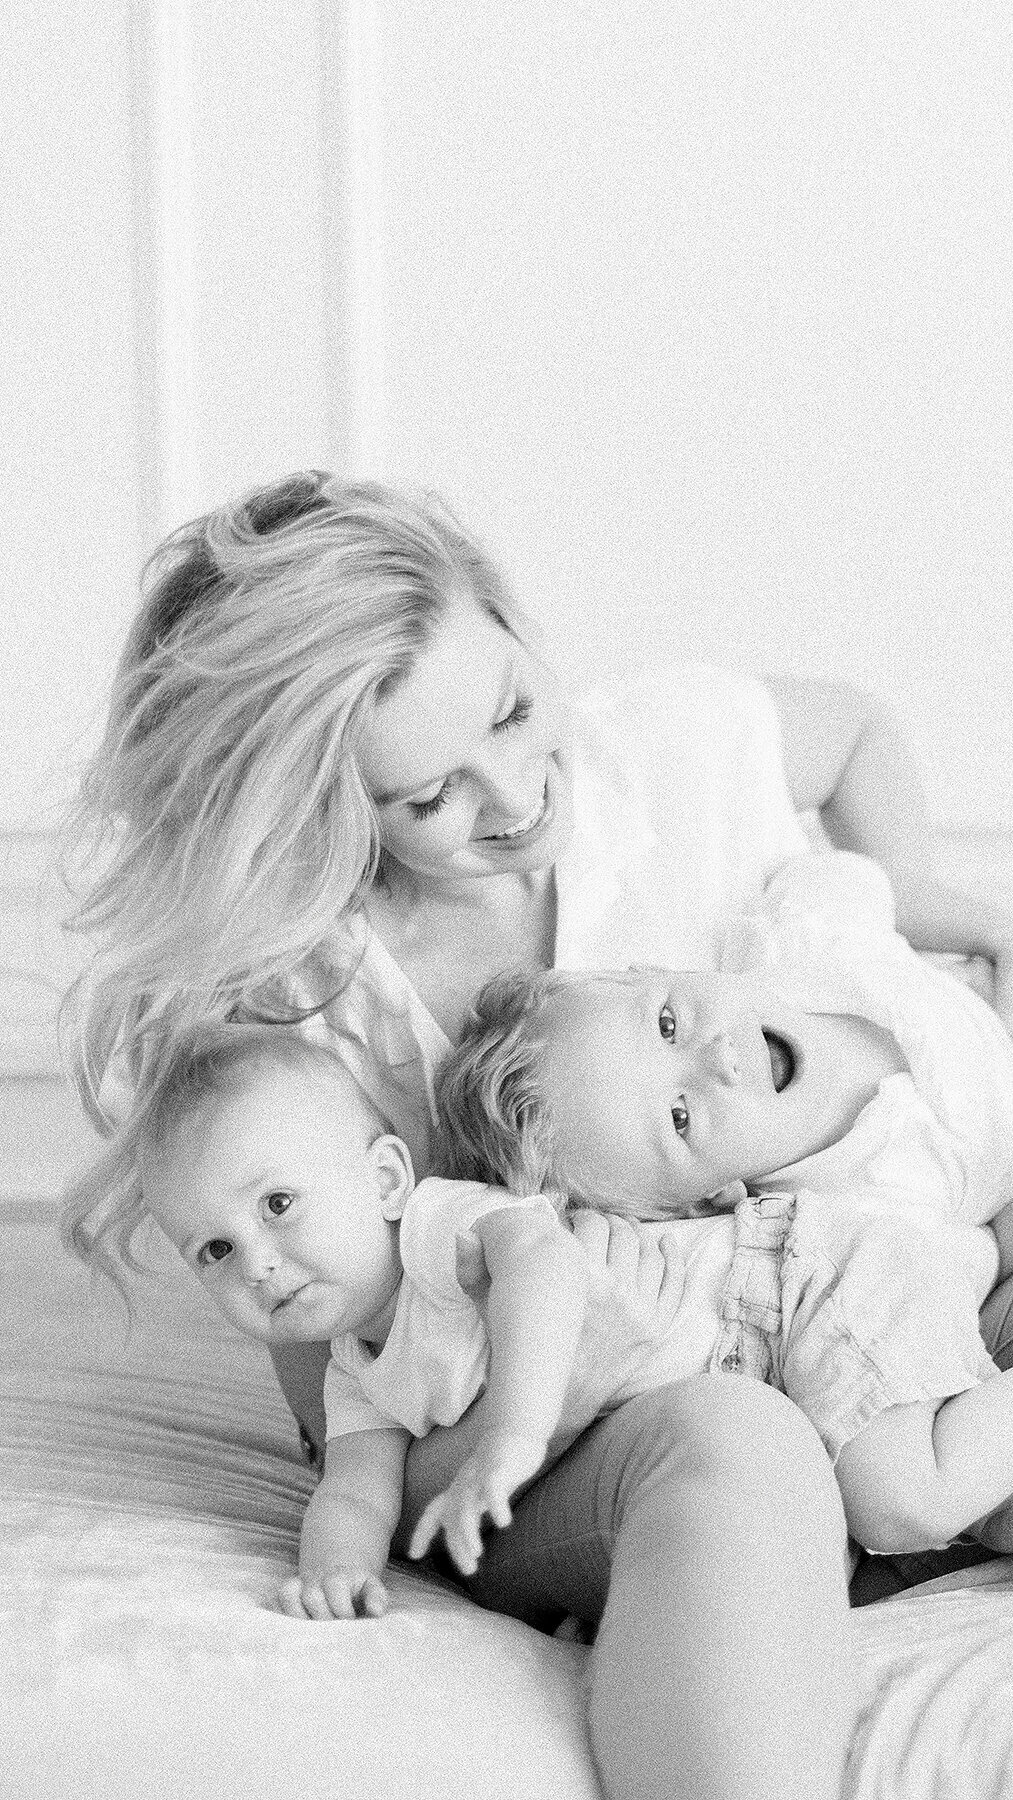 A fun black and white close up photo of a mother and her two kids playing on a bed.